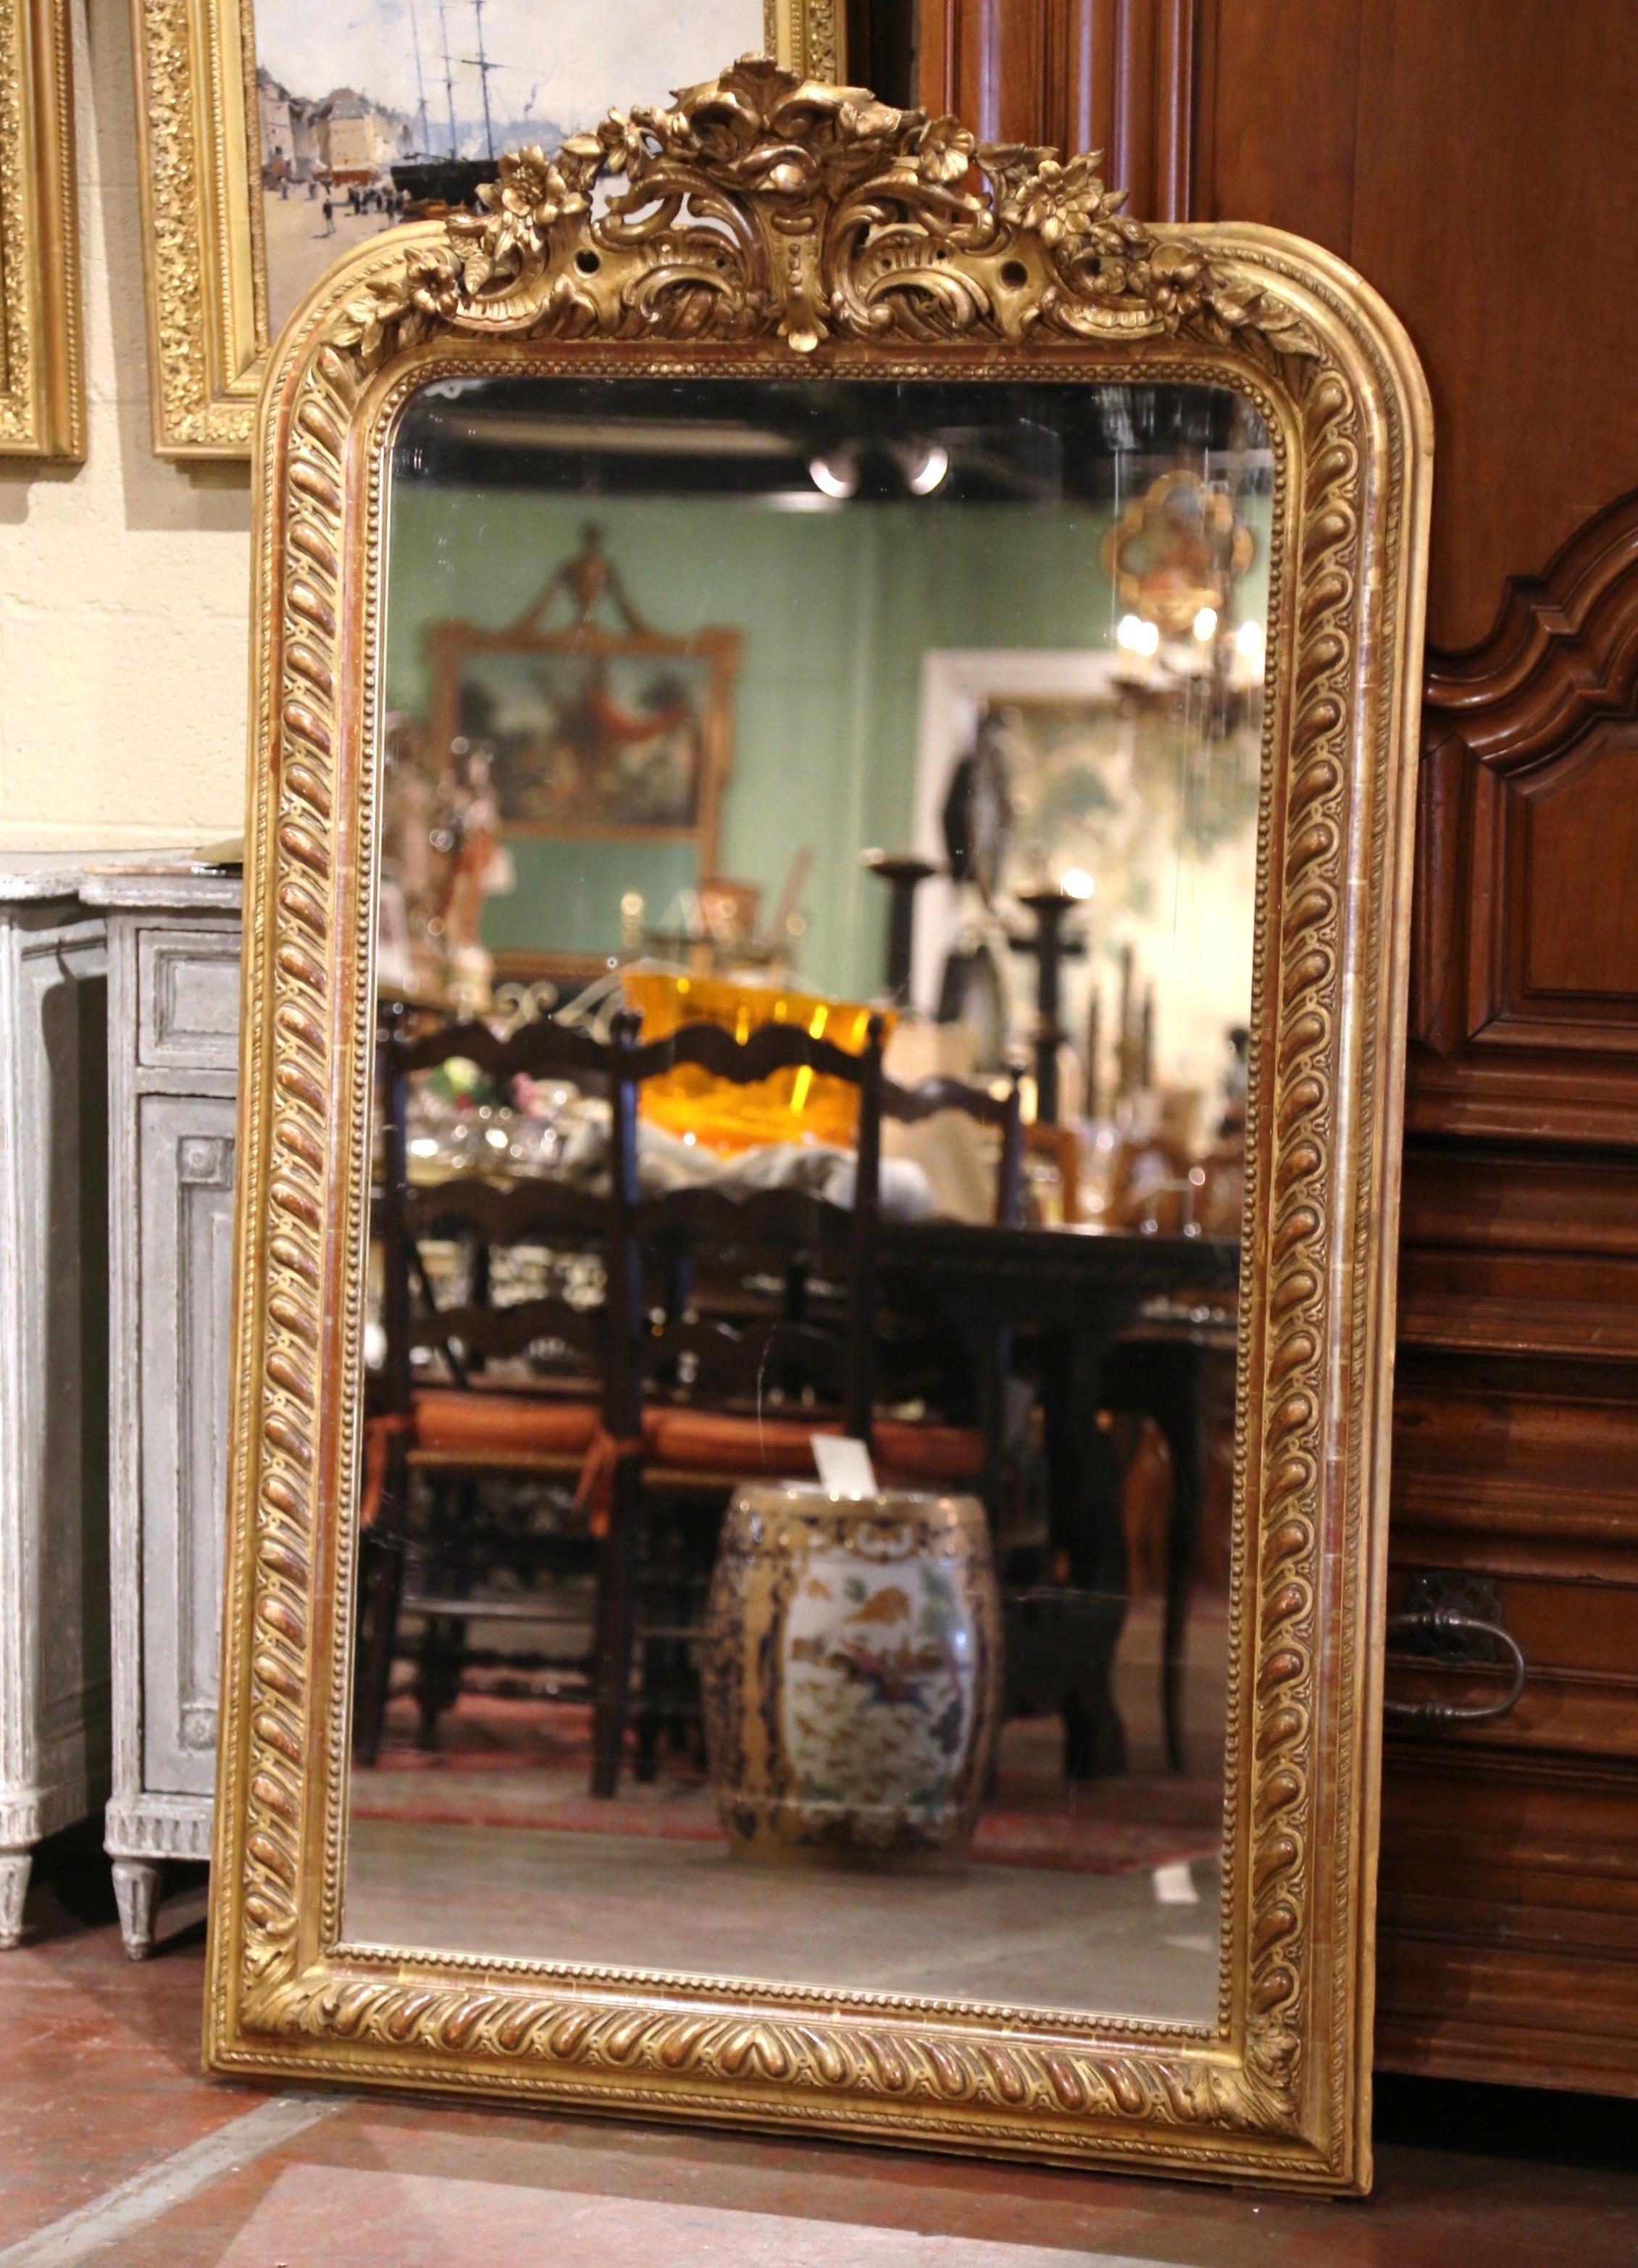 Over five and a half feet tall, this important antique mirror is a one of a kind! Crafted in Paris, France circa 1850, the grand mirror is decorated with a hand carved cartouche at the pediment featuring floral and foliage motifs in high relief. The